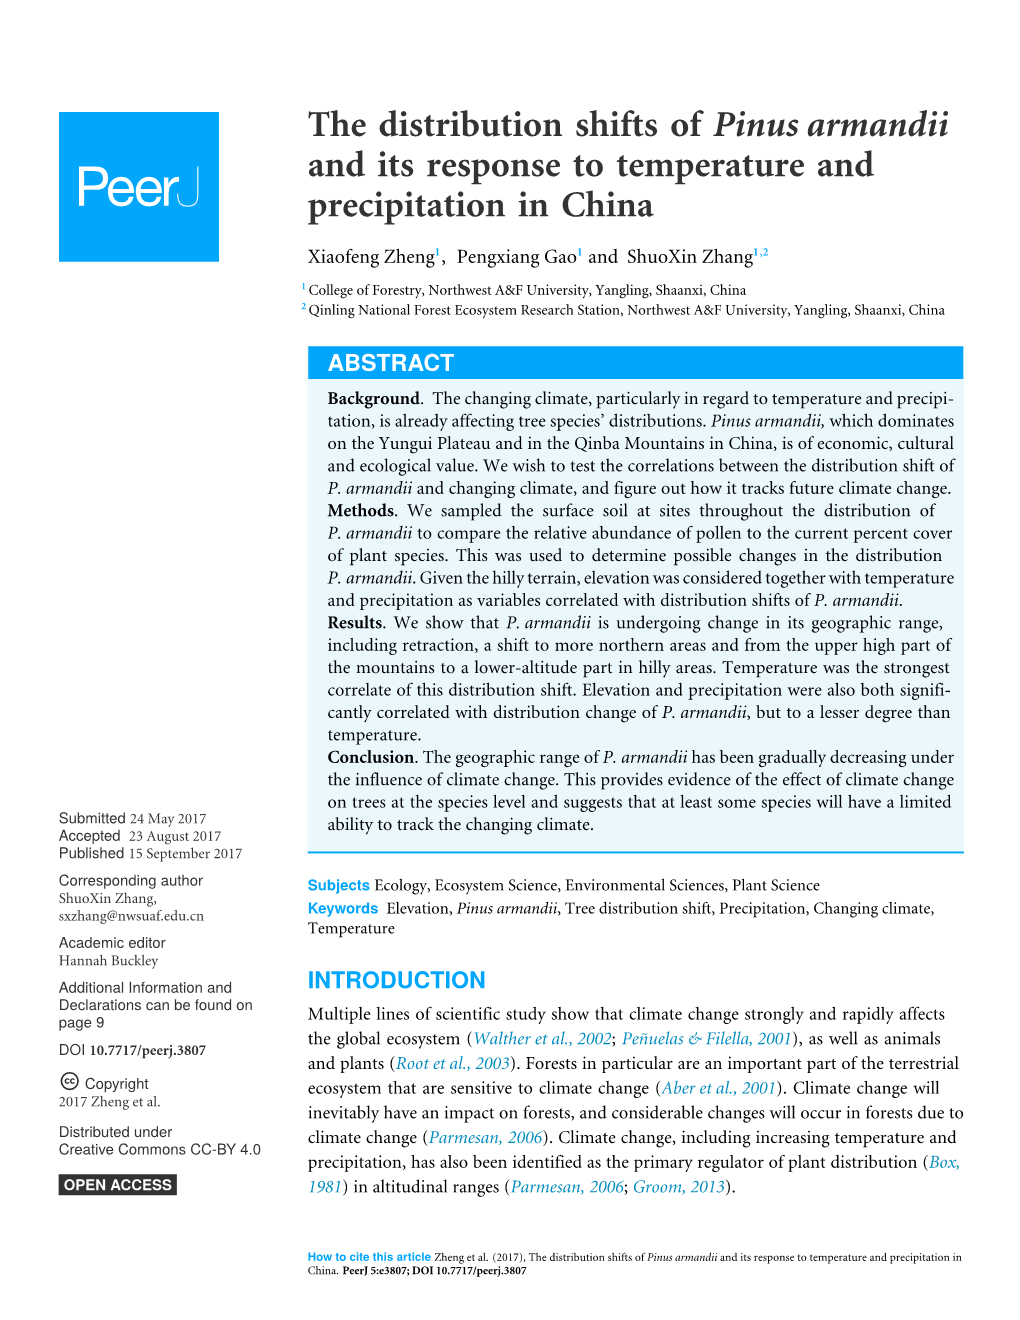 The Distribution Shifts of Pinus Armandii and Its Response to Temperature and Precipitation in China